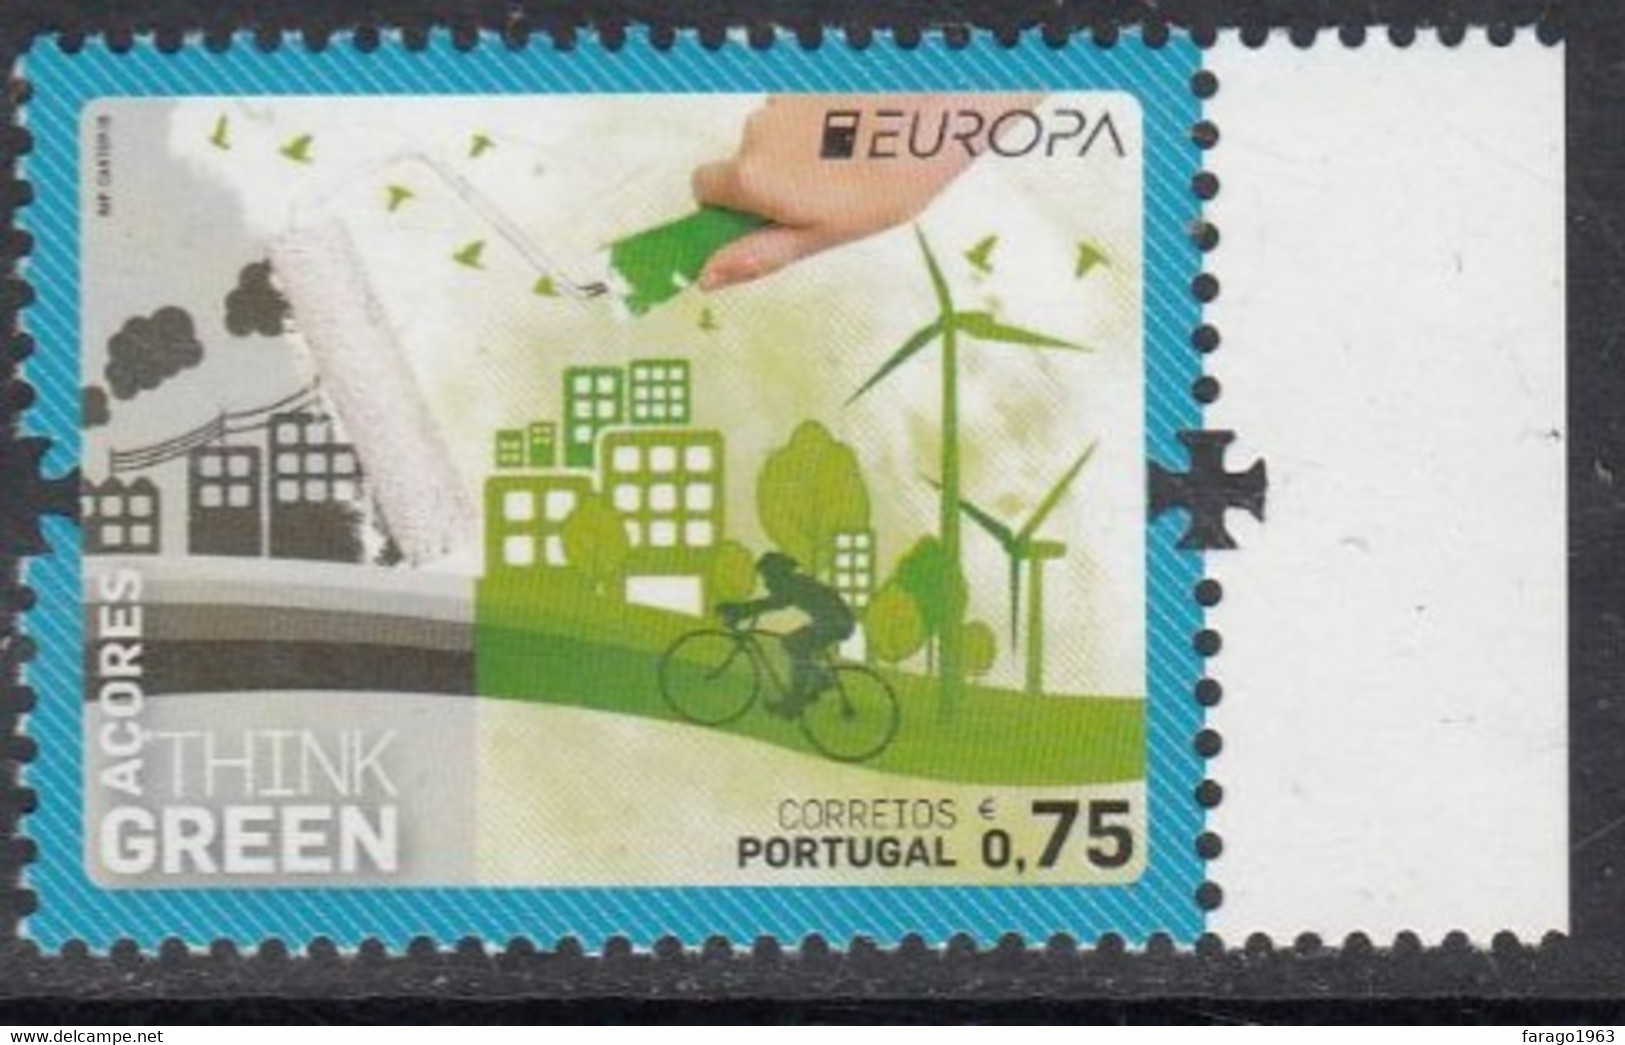 2016 Azores Acores Think Green Environment Complete Set Of 1 MNH @ BELOW FACE VALUE - 2016